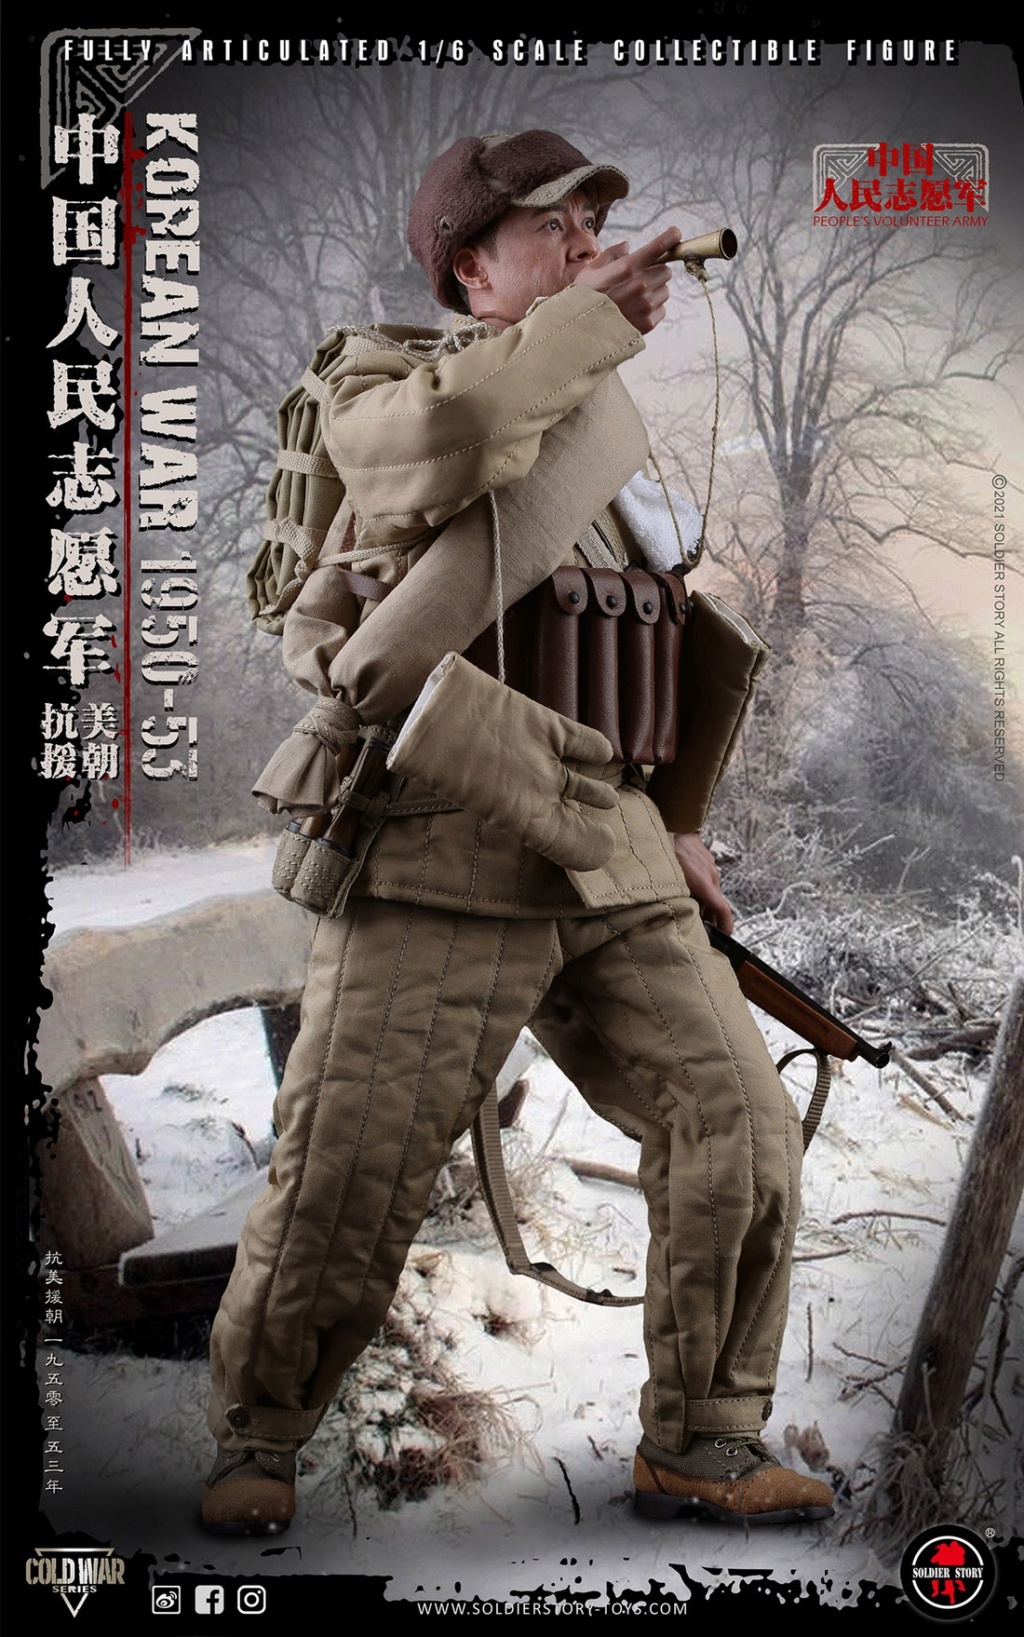 NEW PRODUCT: SOLDIER STORY: 1/6 Chinese People’s Volunteers 1950-53 Collectible Action Figure (#SS-124) 0daa1410